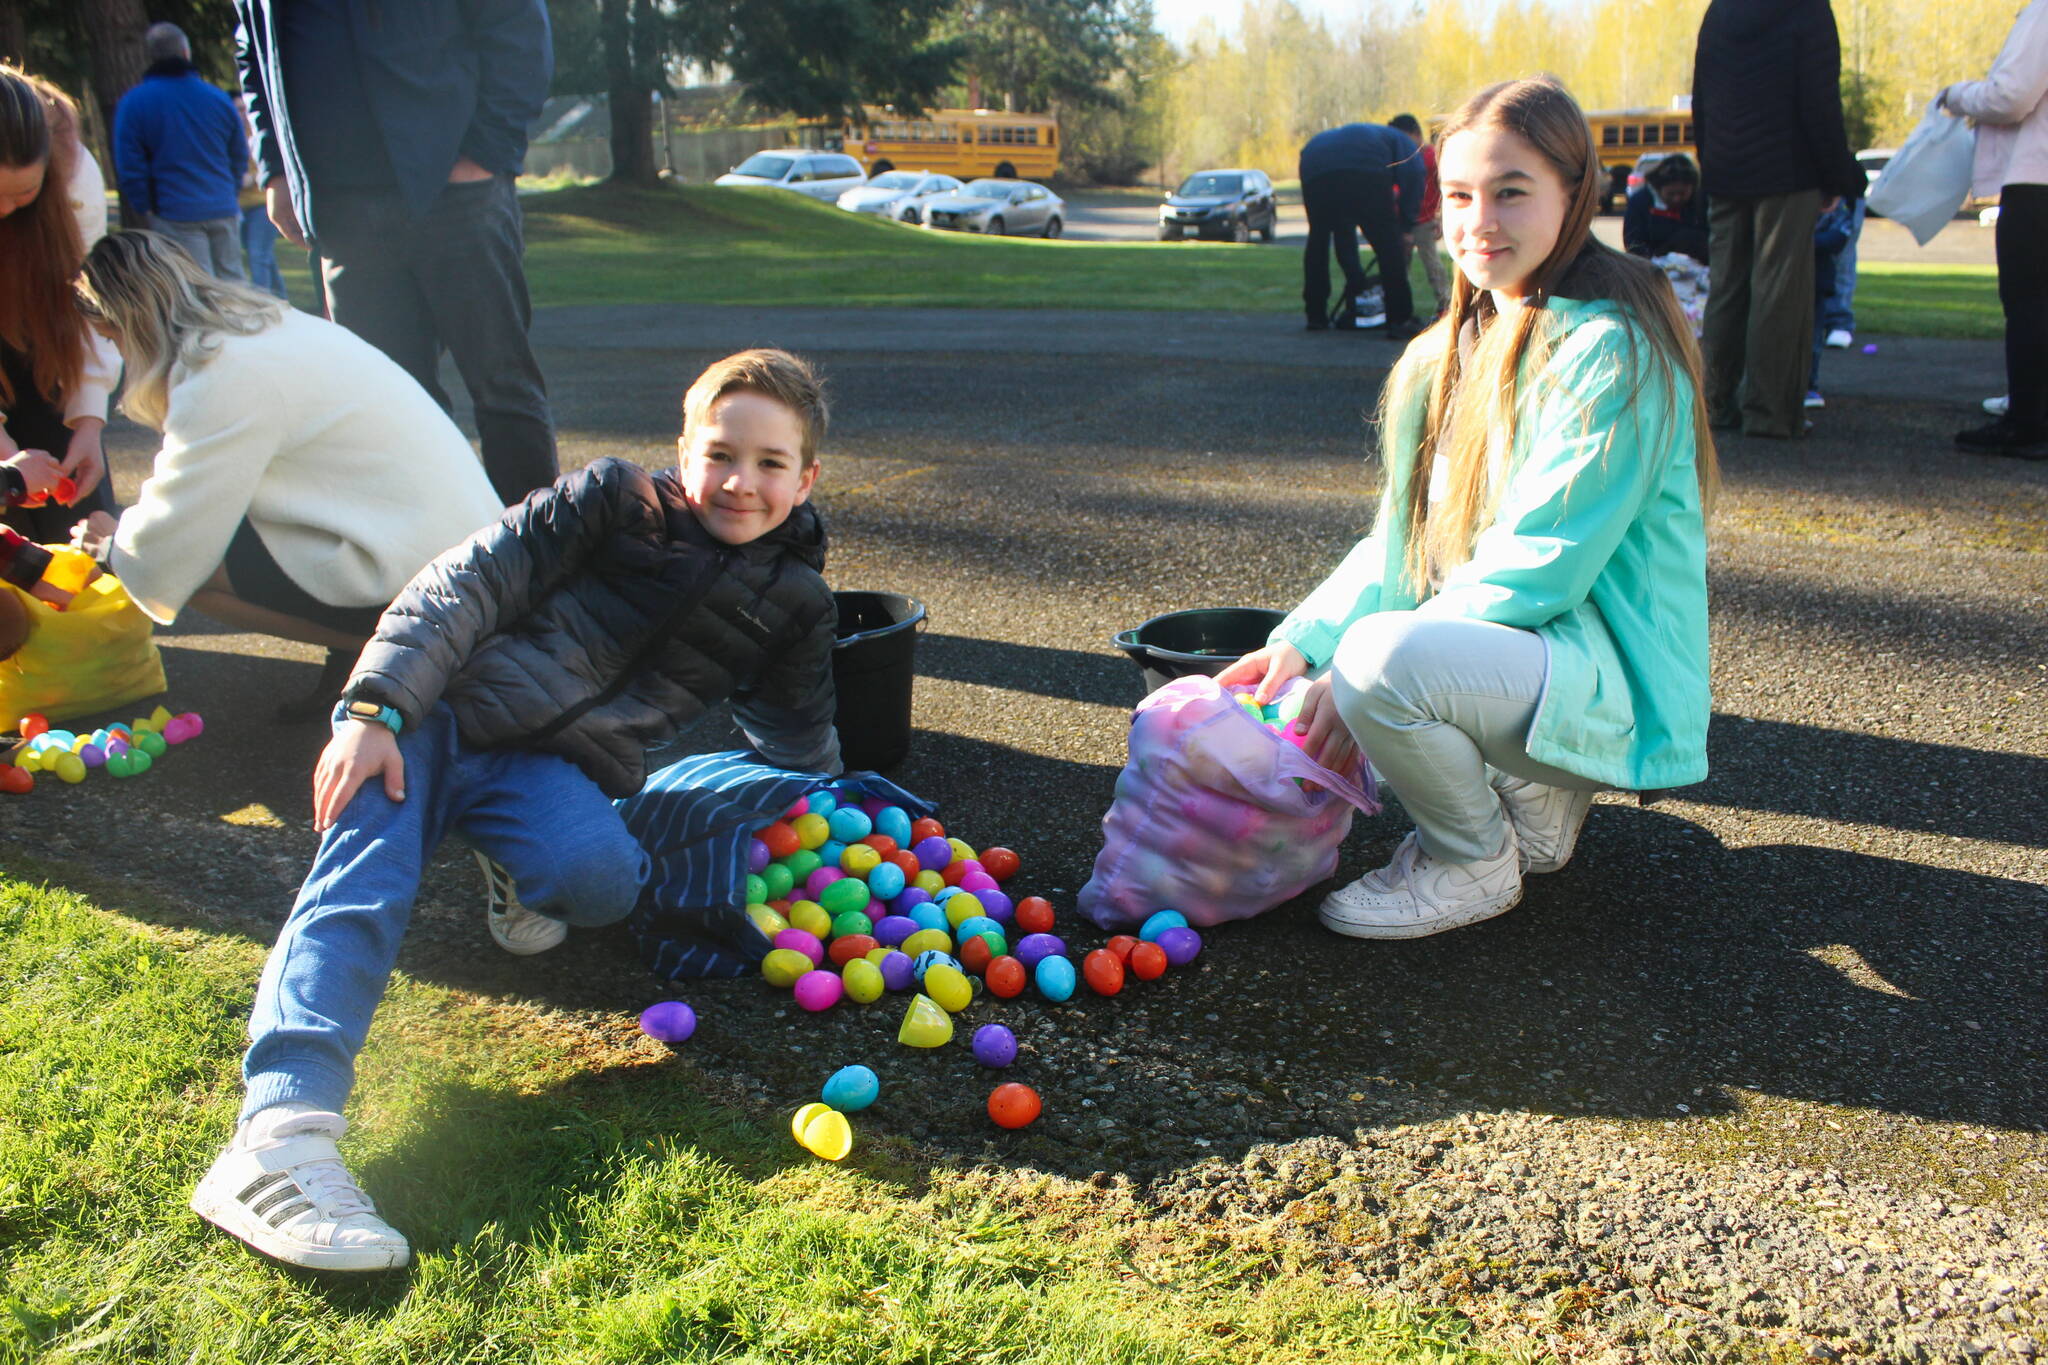 This year, Easter Sunday was on March 31 and at NextStep Fellowship in Renton, a pre-service community Easter egg hunt was afoot. Photos by Bailey Jo Josie/Sound Publishing